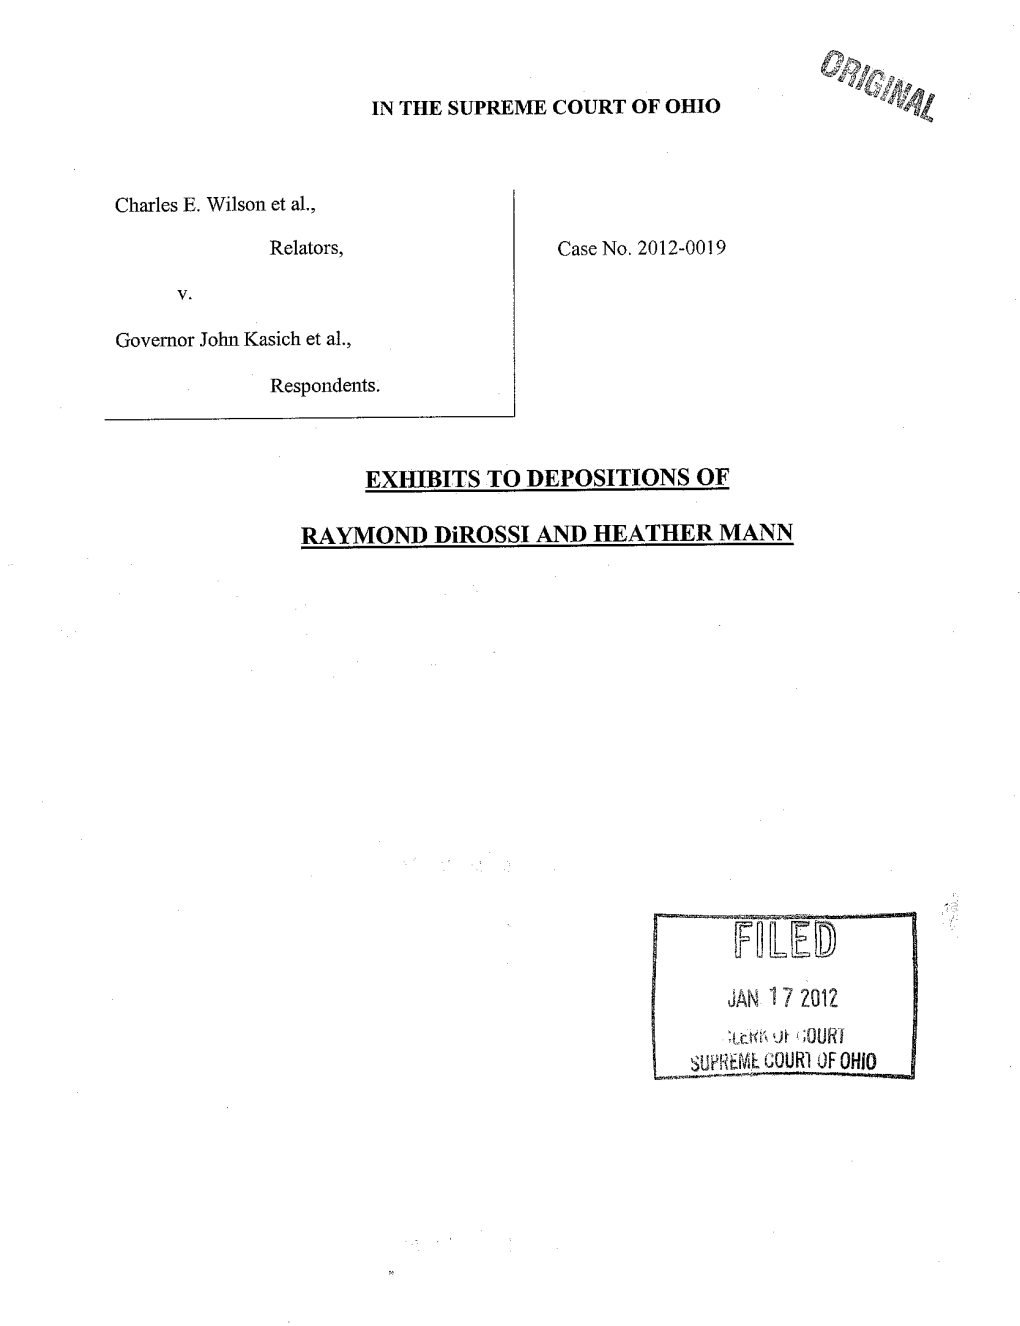 Exhibits to Depositions Of